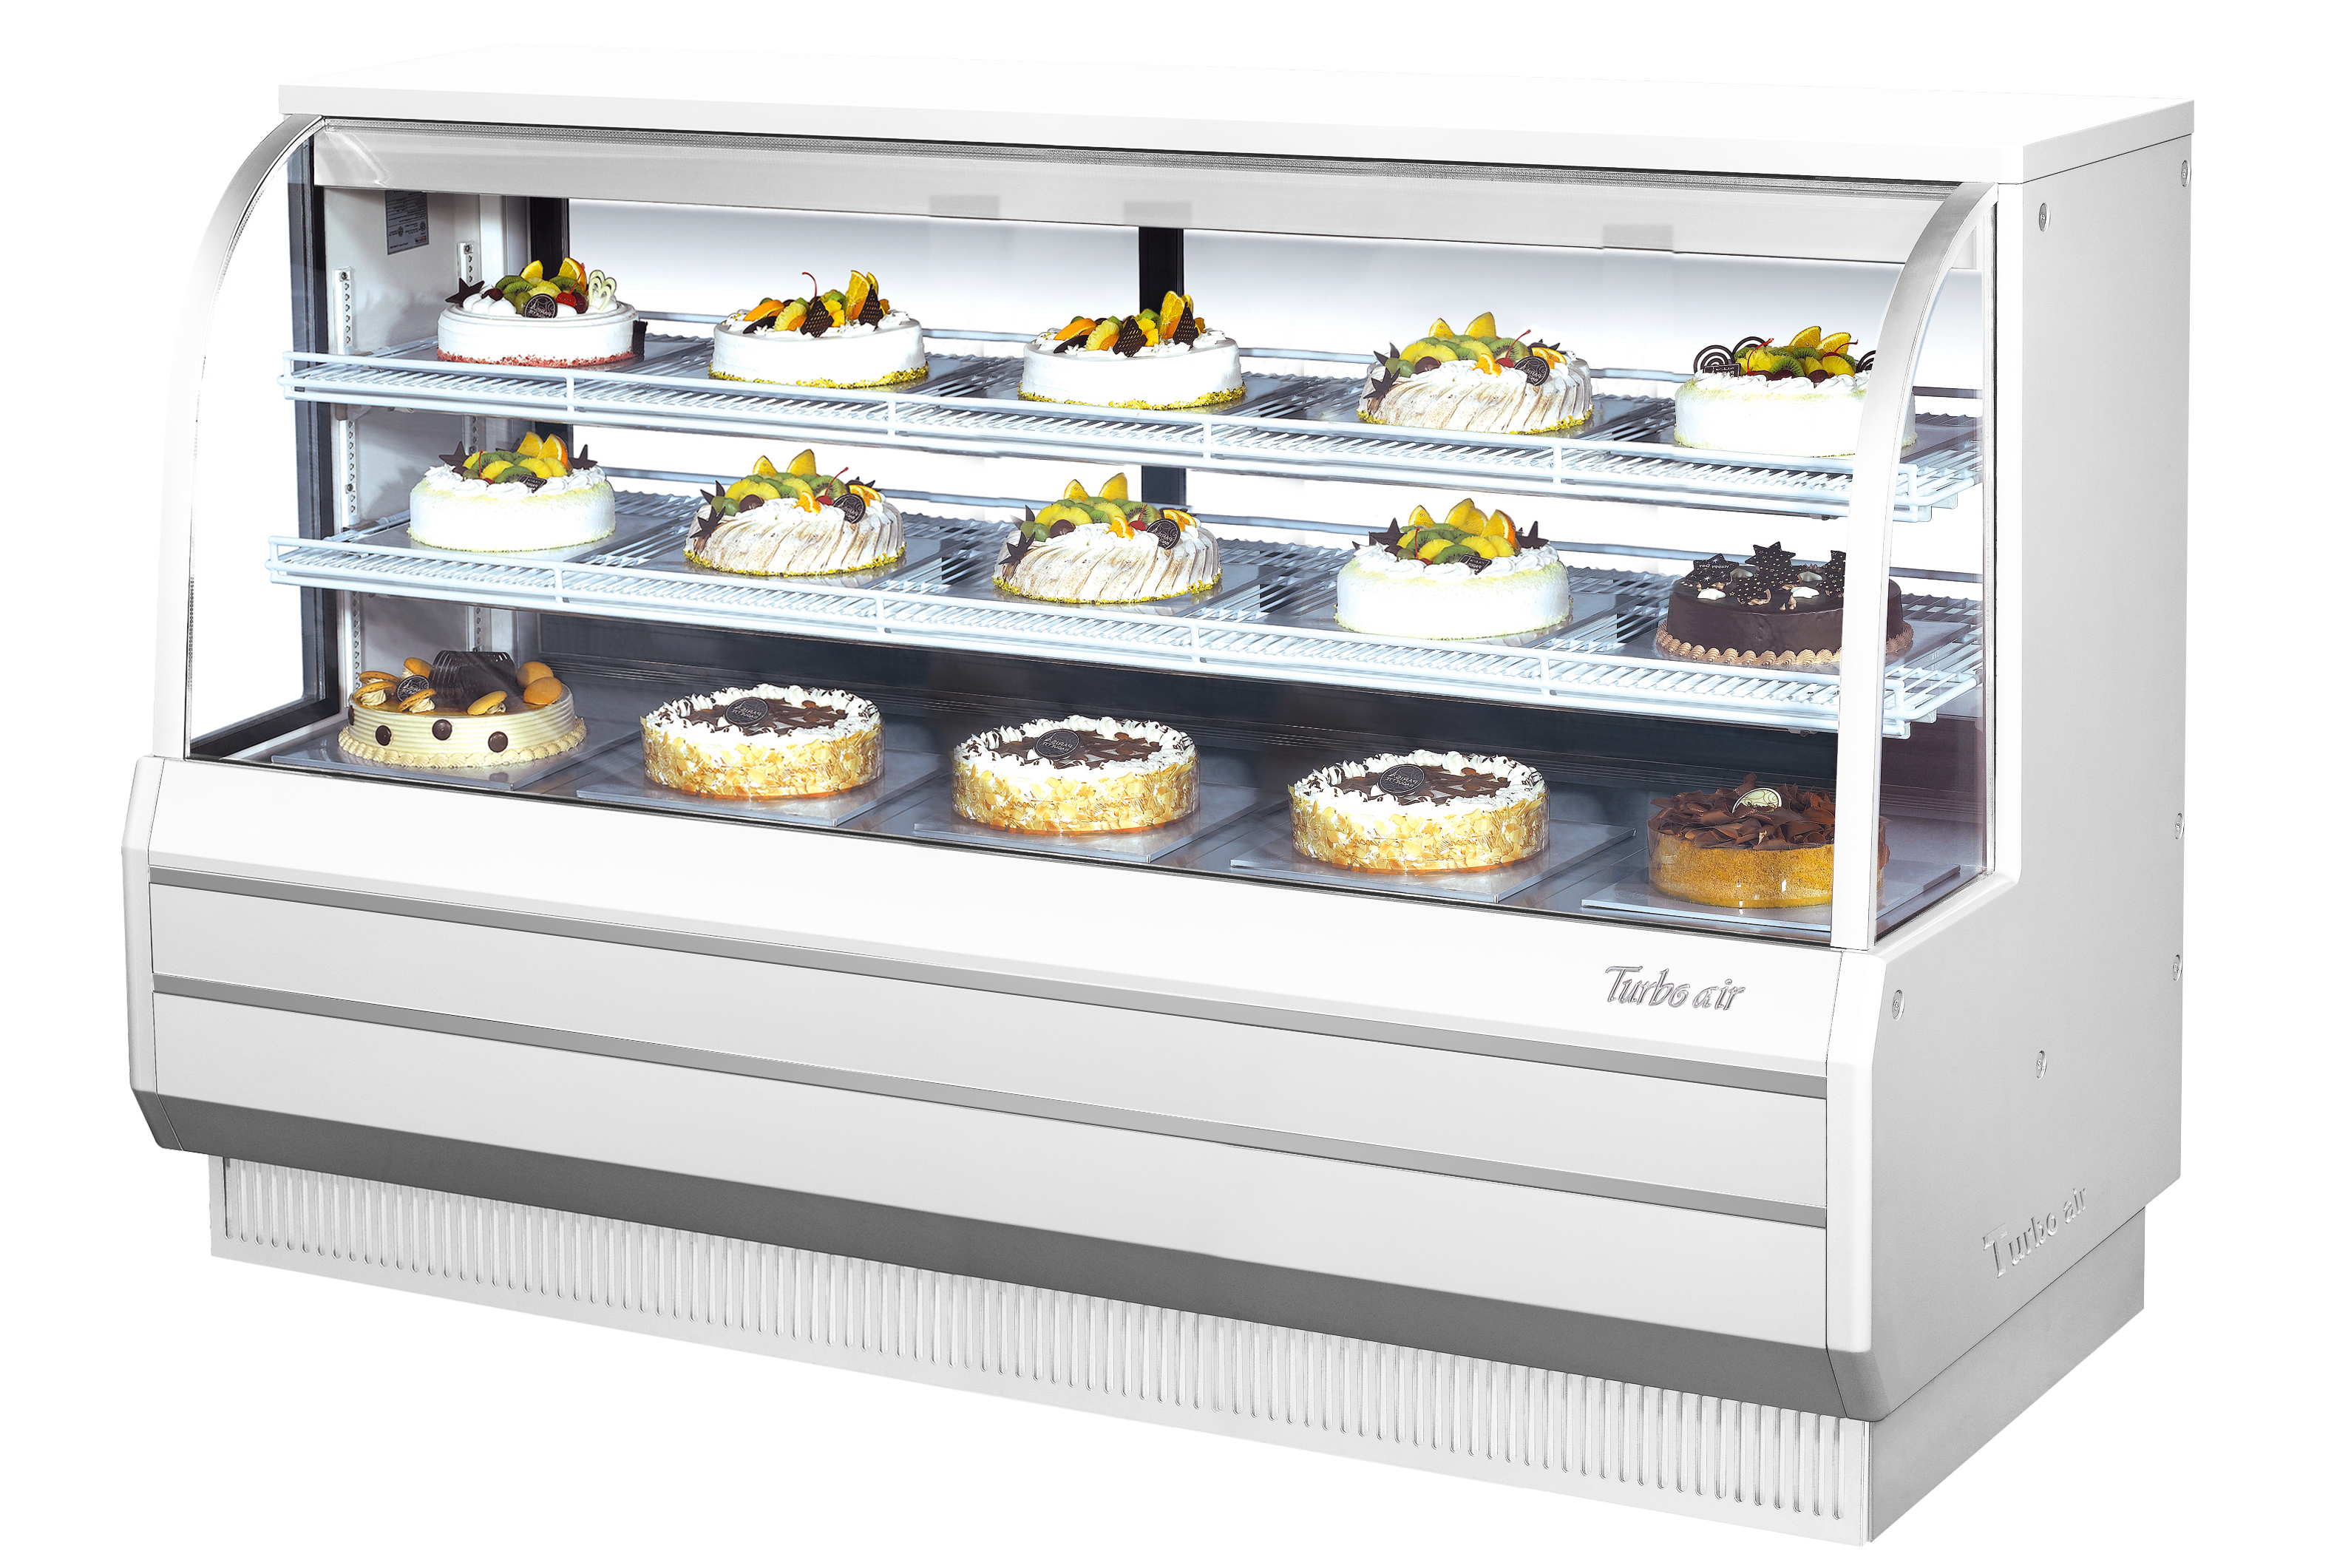 Bakery Case, combi dry & refrigerated, (2) 11.1 cu.ft